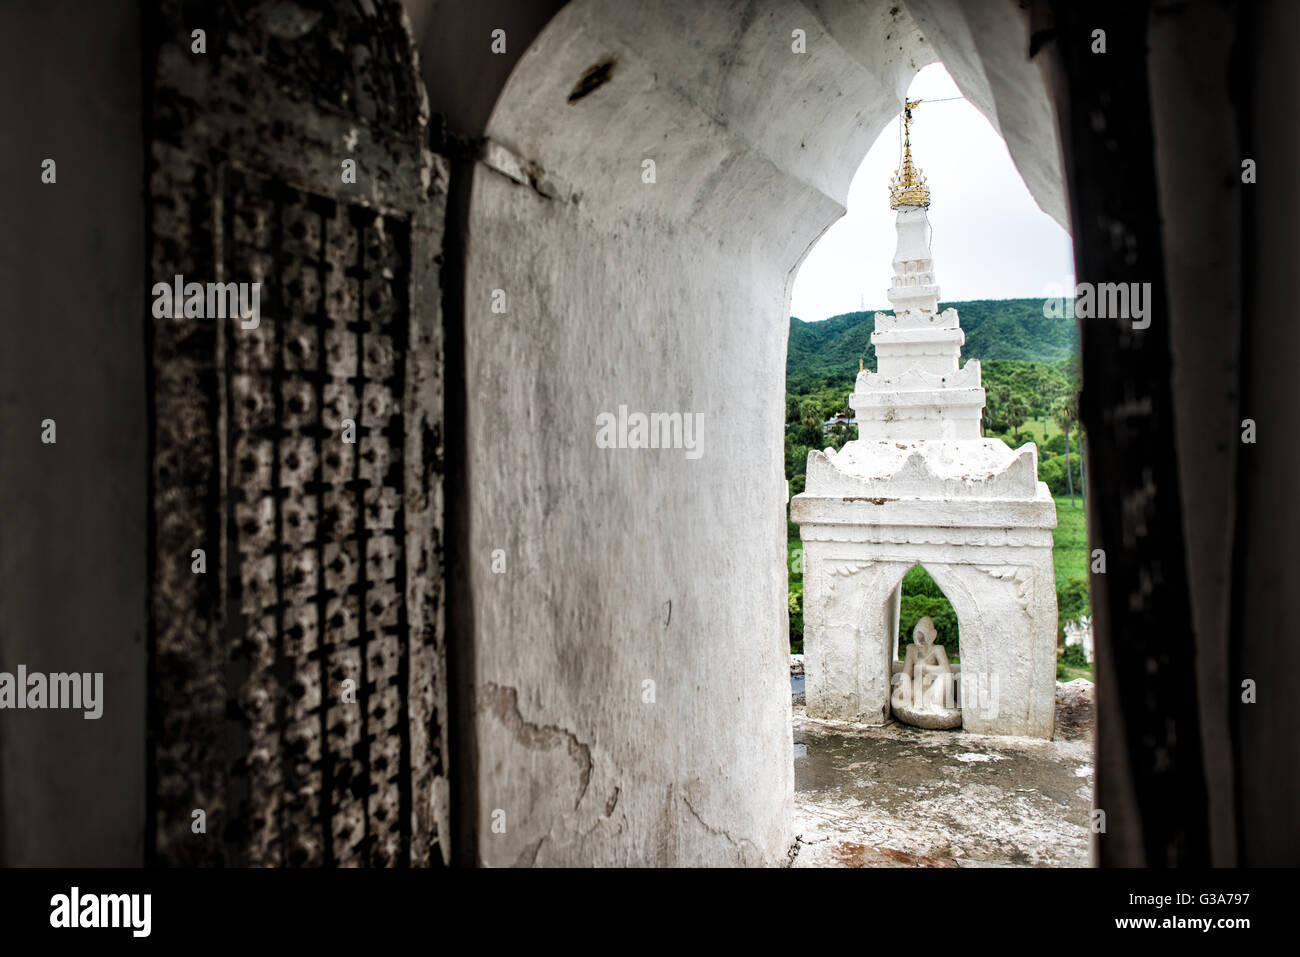 MINGUN, Myanmar (Burma) — Built in 1816 and located in Mingun, not far from Mandalay, Hsinbyume Pagoda is designed in inspiration from Buddhist mythological mountain, Mount Meru. It features 7 levels of distinctive and unique whitewashed waves. Stock Photo